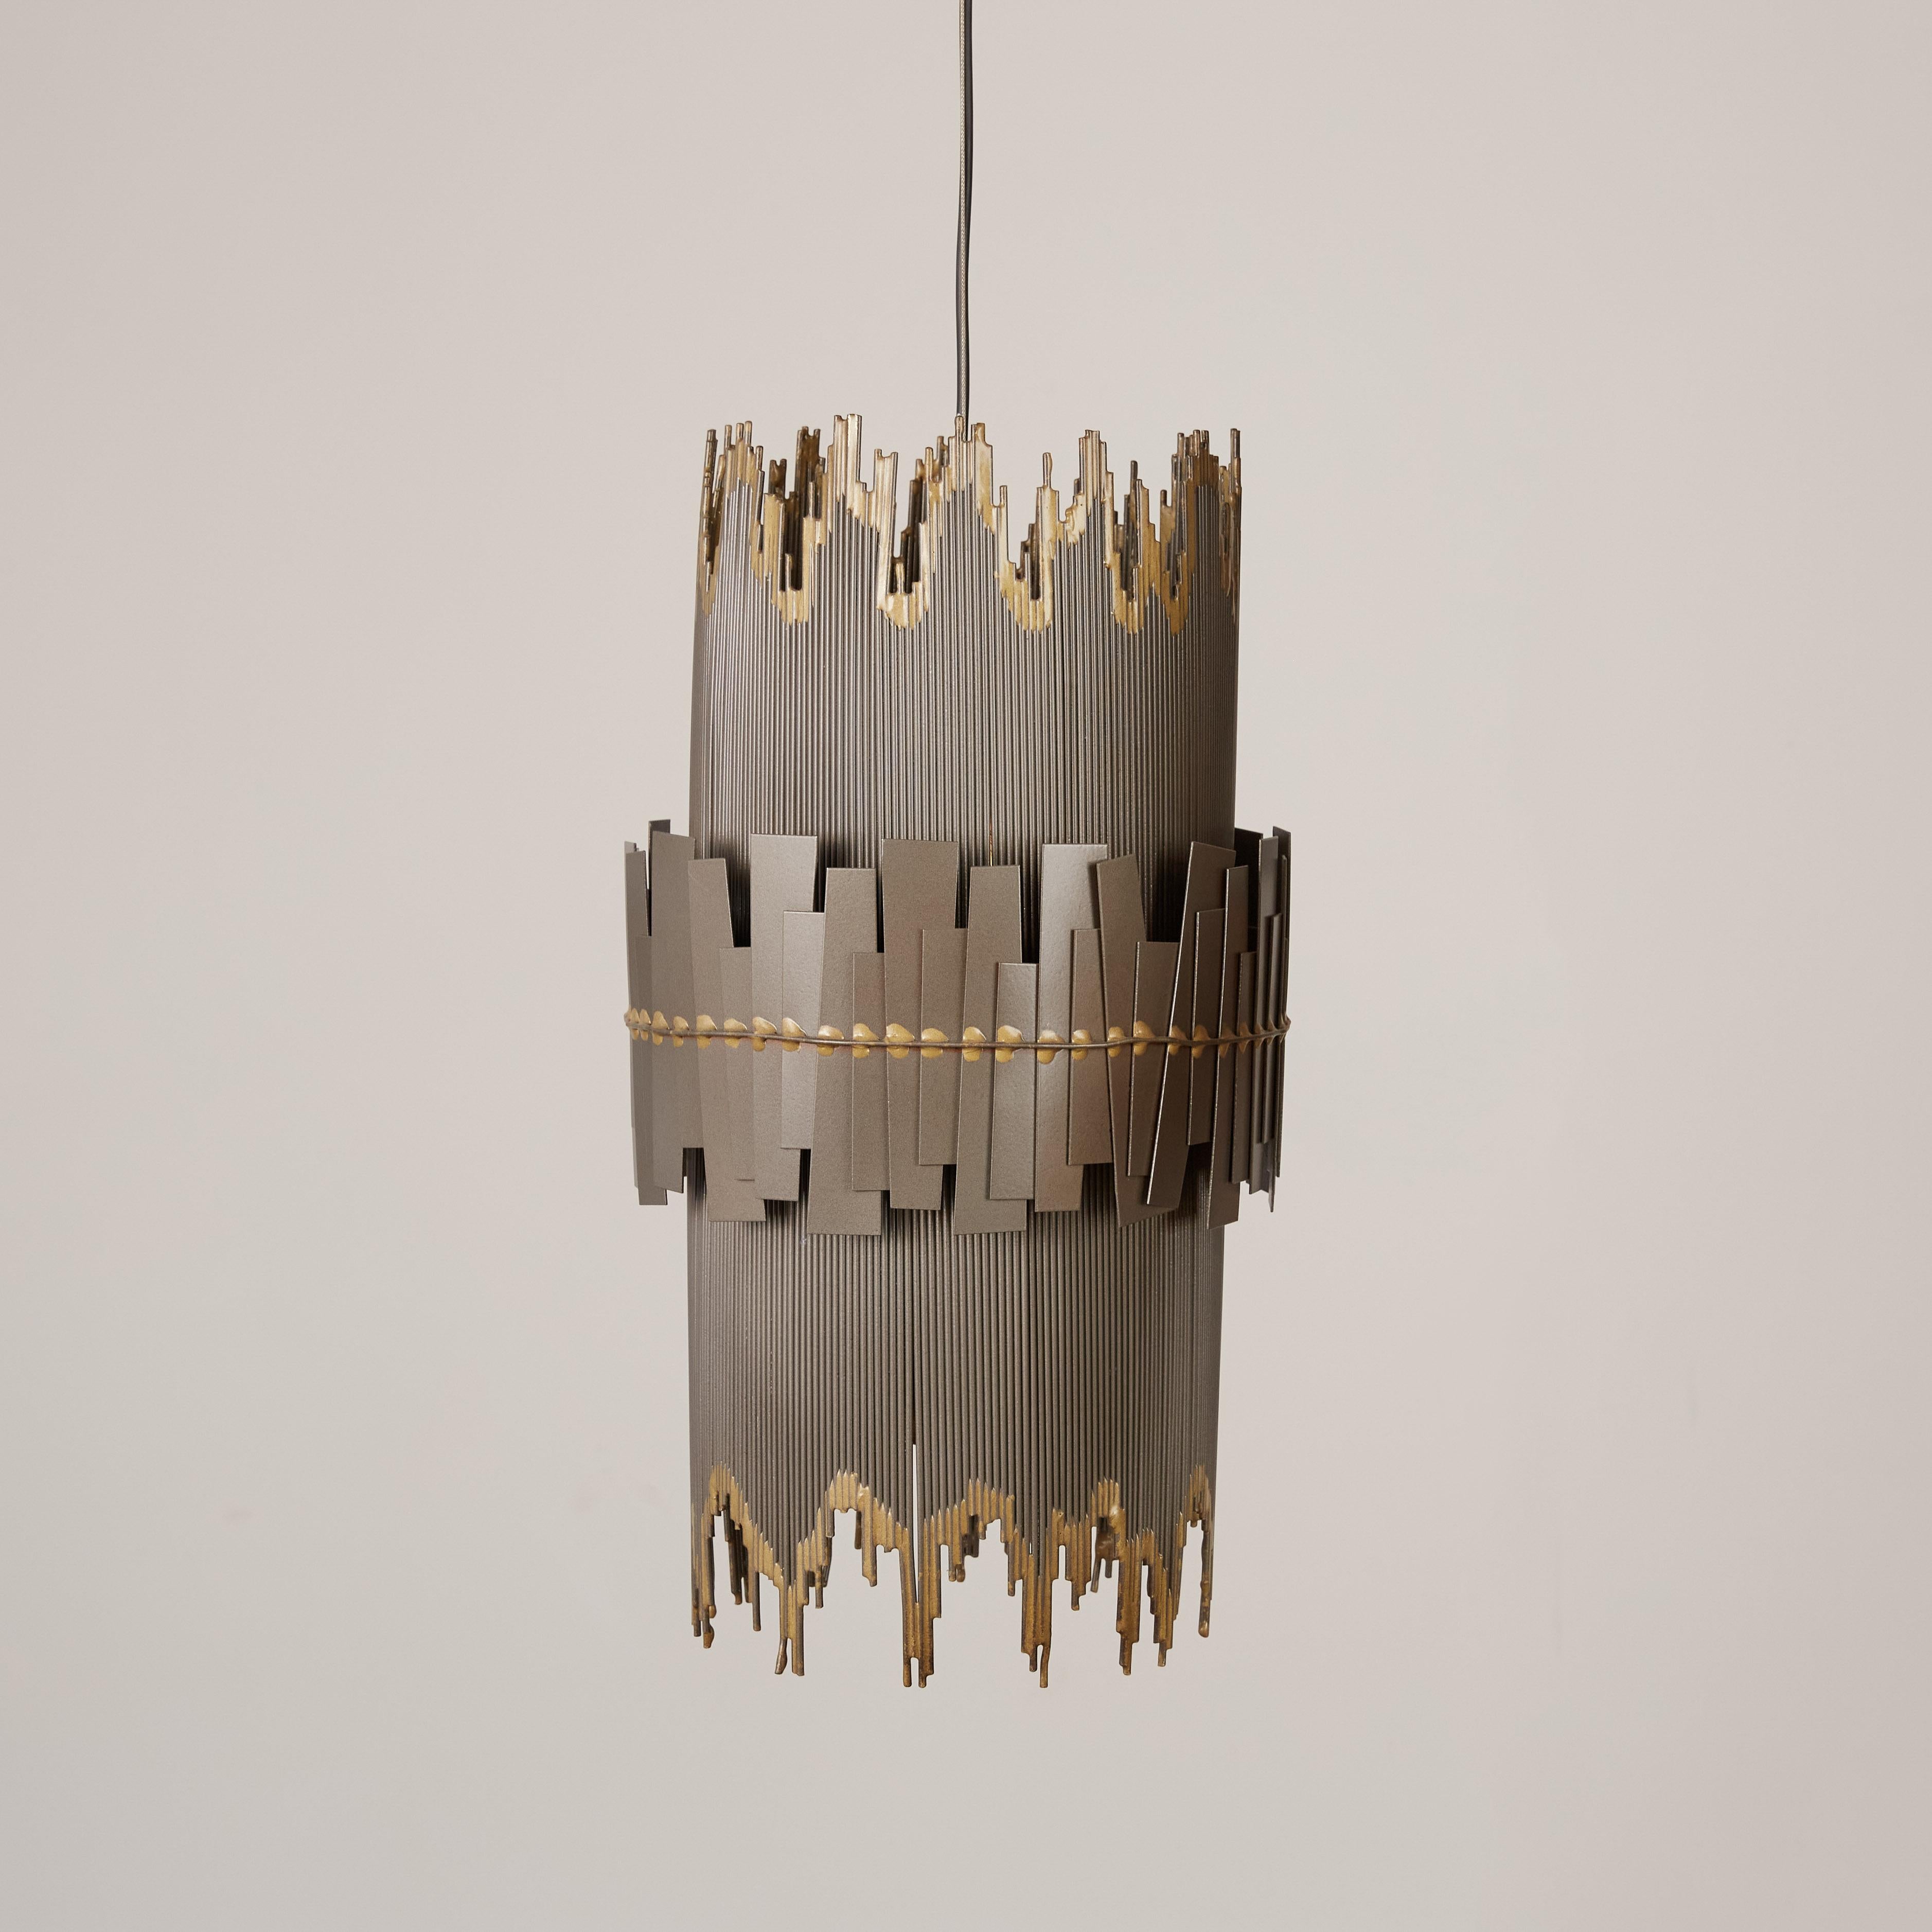 A brutalist metal pendant lamp with a cylindrical shape and irregular edges by Curtis Jeré. The main shape of the fixture has a striated frame with contrasting edges; a slightly wider ring of irregularly welded metal pieces wraps the central